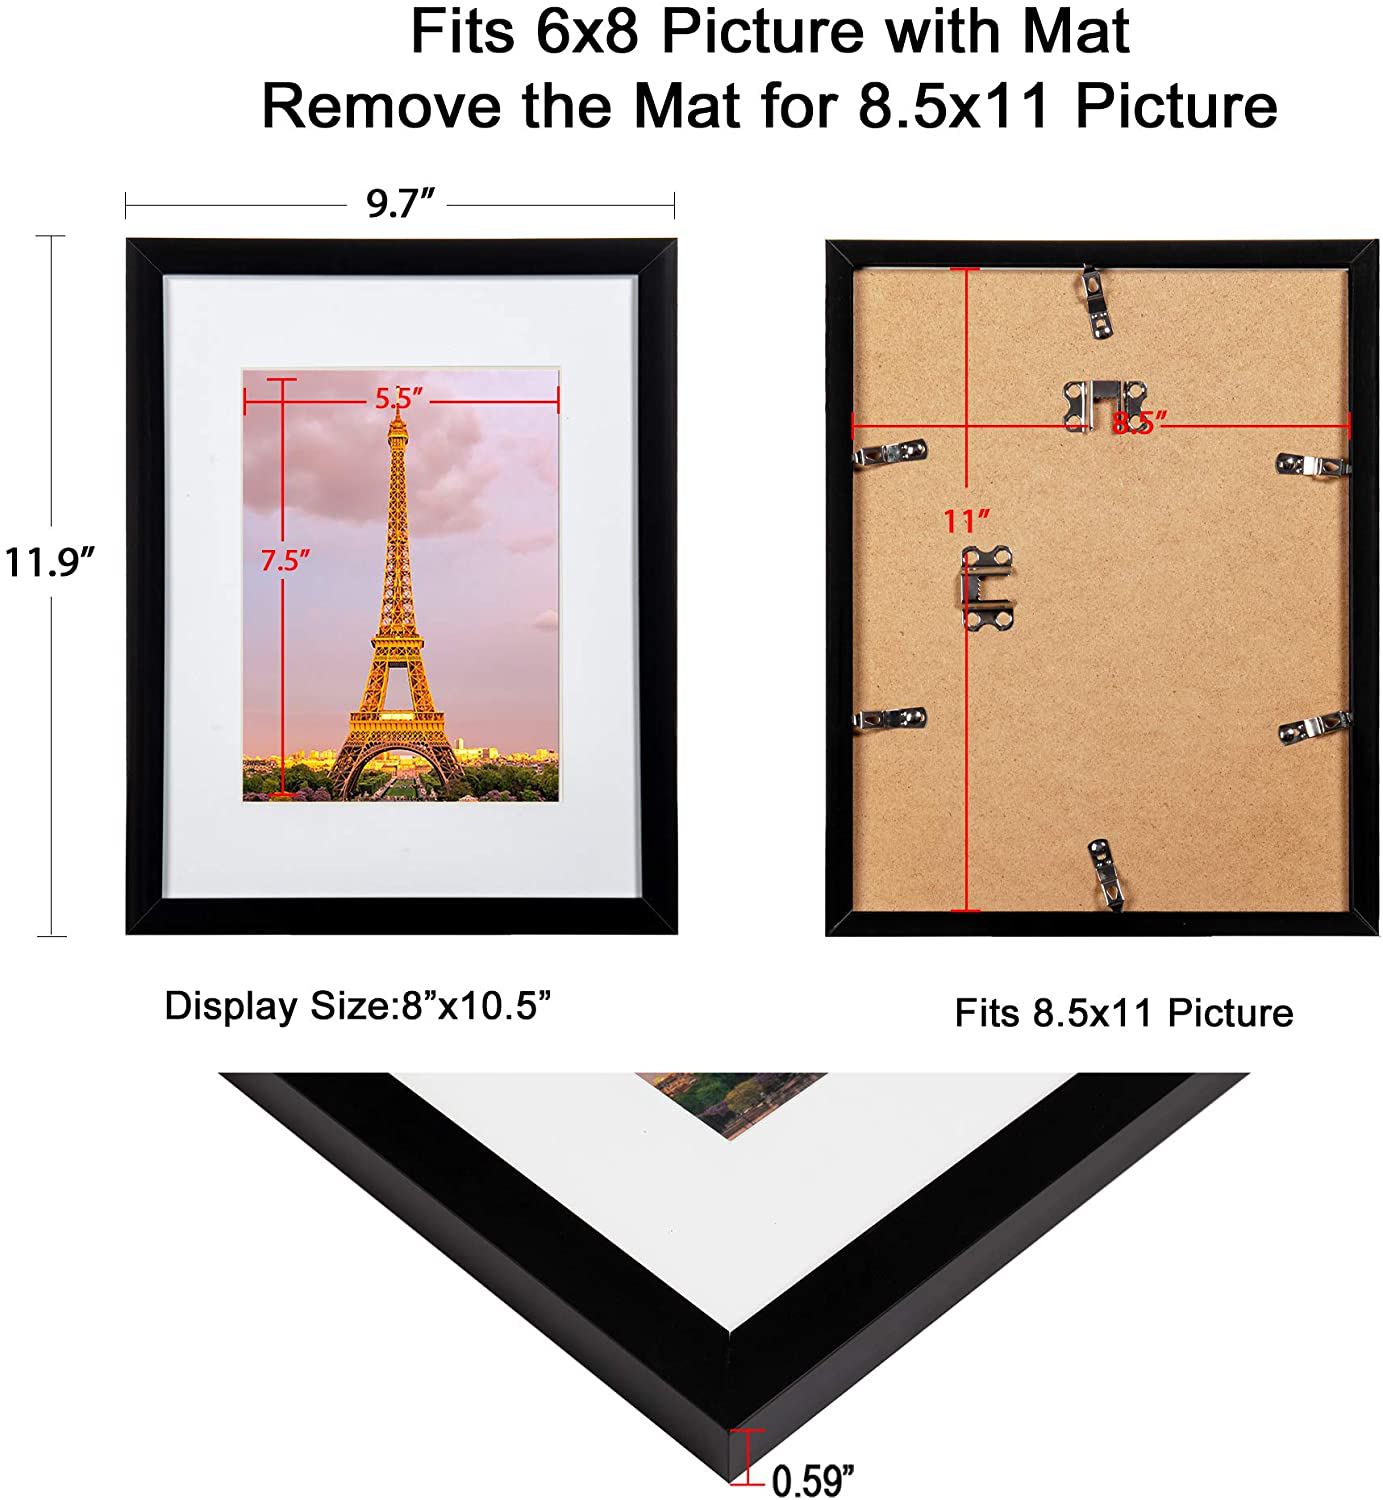 upsimples 8.5x11 Picture Frame Set of 3,Made of High Definition Glass for 6x8 with Mat or 8.5x11 Without Mat,Wall Mounting Photo Frame Black